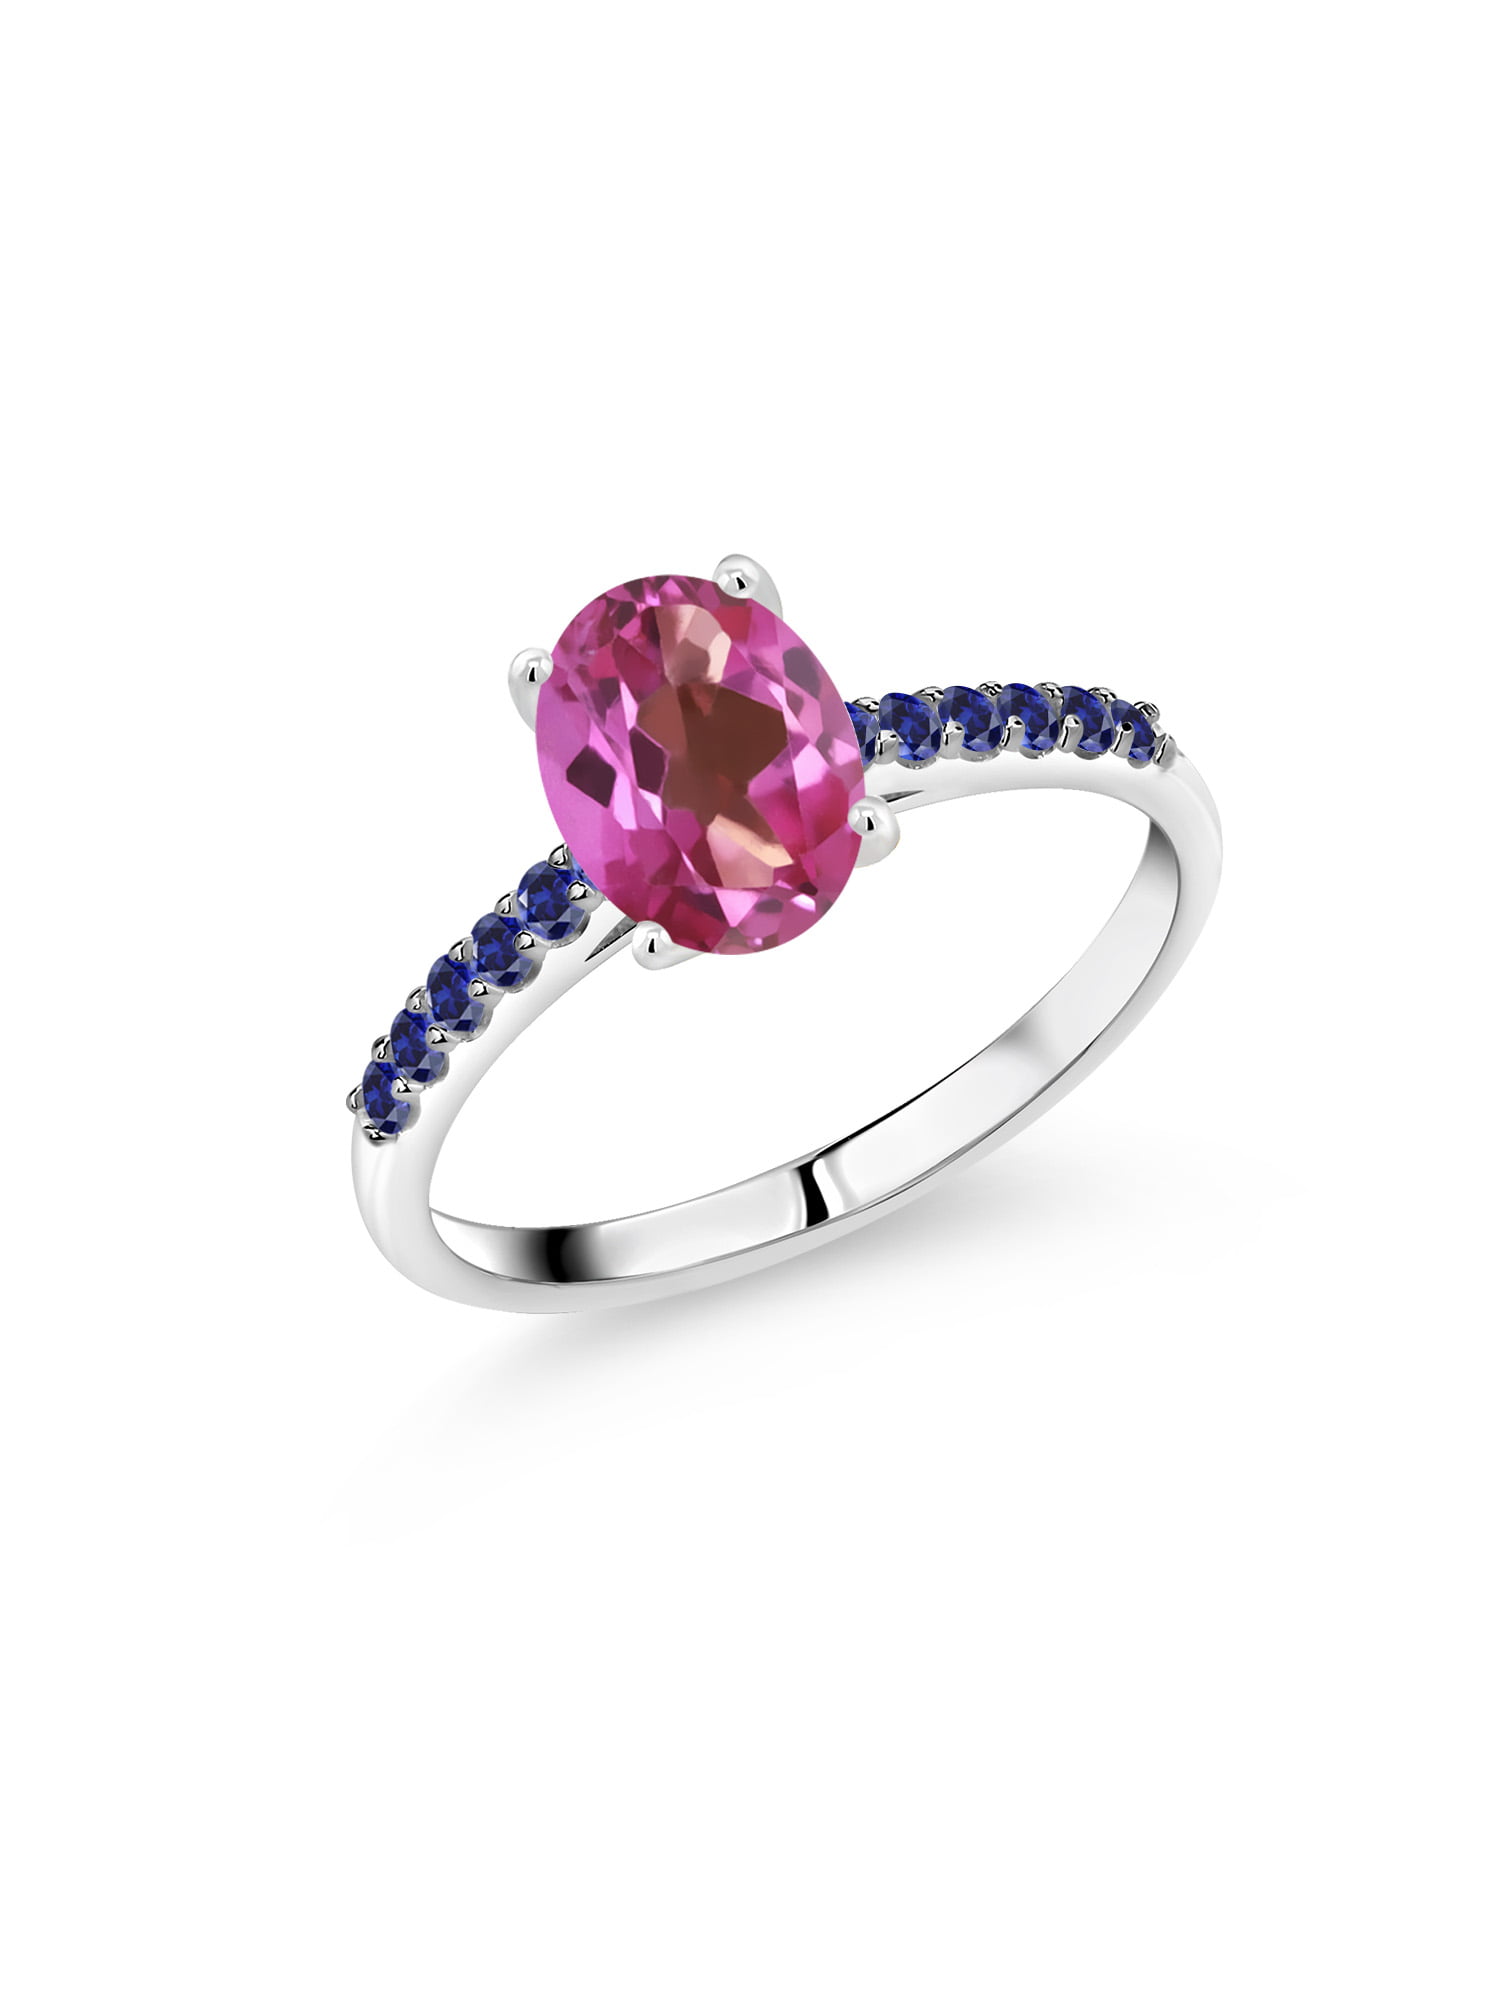 Gem Stone King 1.54 Ct Oval Pink Mystic Topaz Blue Created Sapphire 10K  White Gold Ring